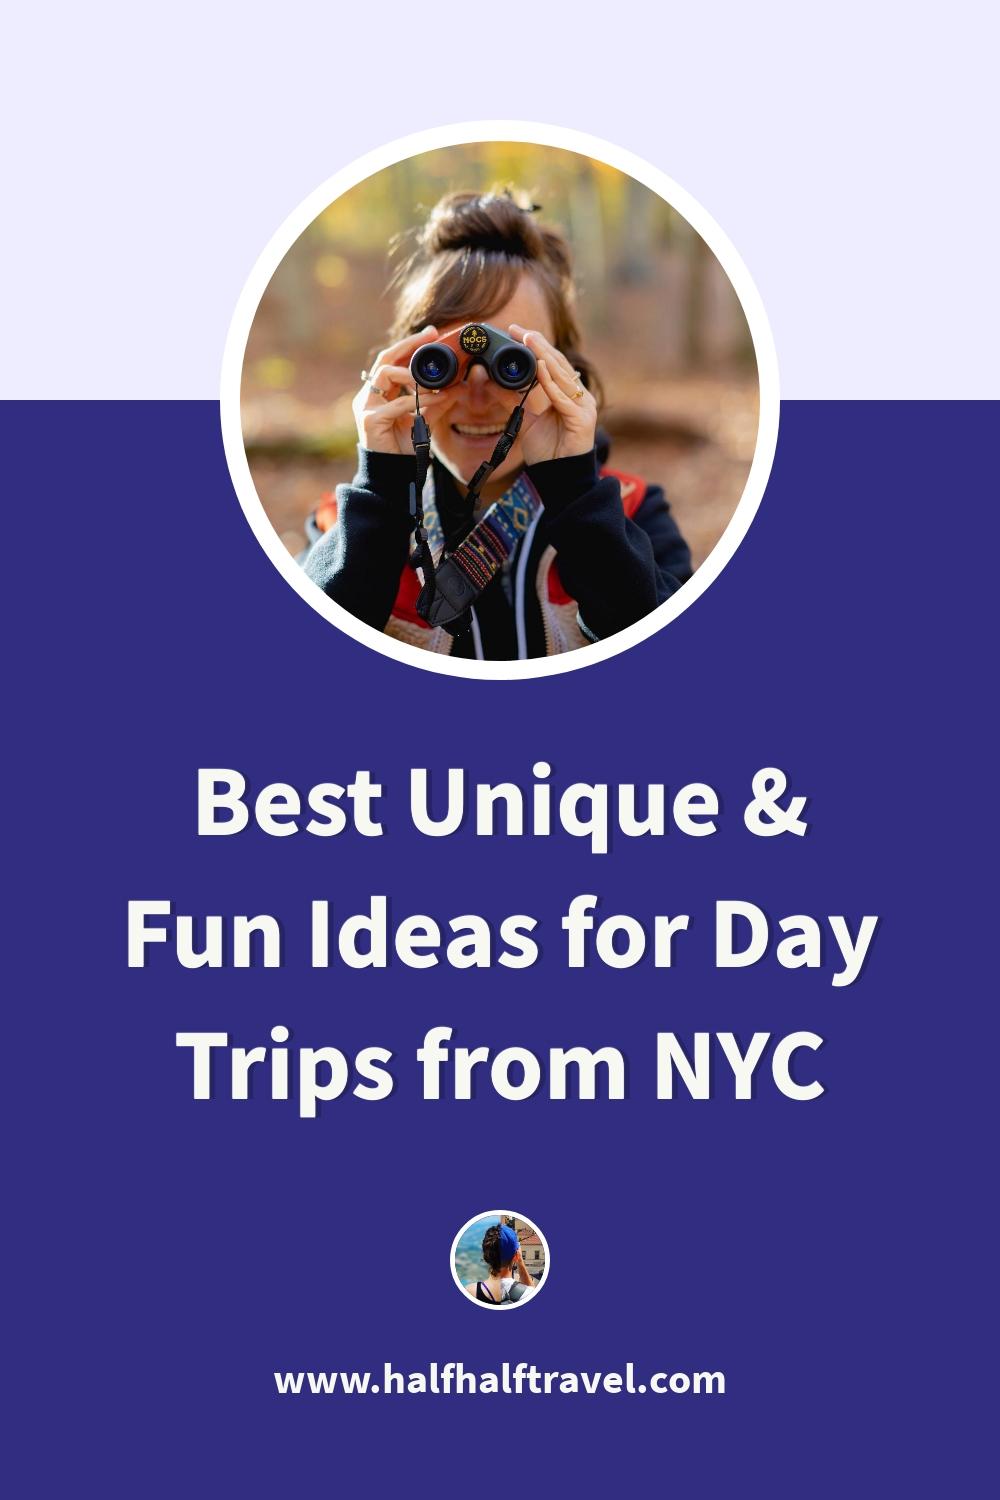 Pinterest image from the 'Best Unique & Fun Ideas for Day Trips from NYC' article on Half Half Travel